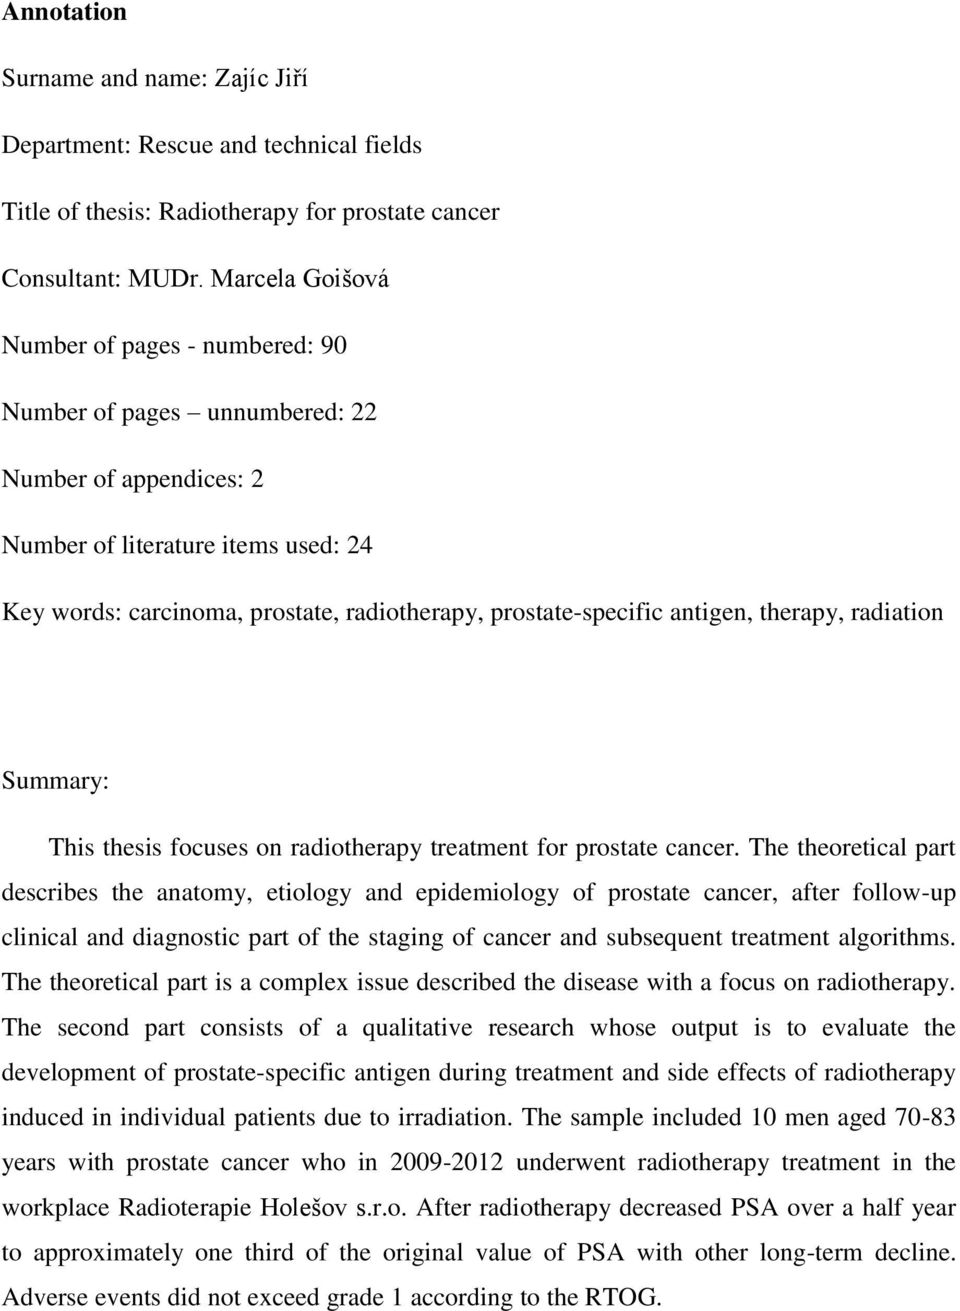 prostate-specific antigen, therapy, radiation Summary: This thesis focuses on radiotherapy treatment for prostate cancer.